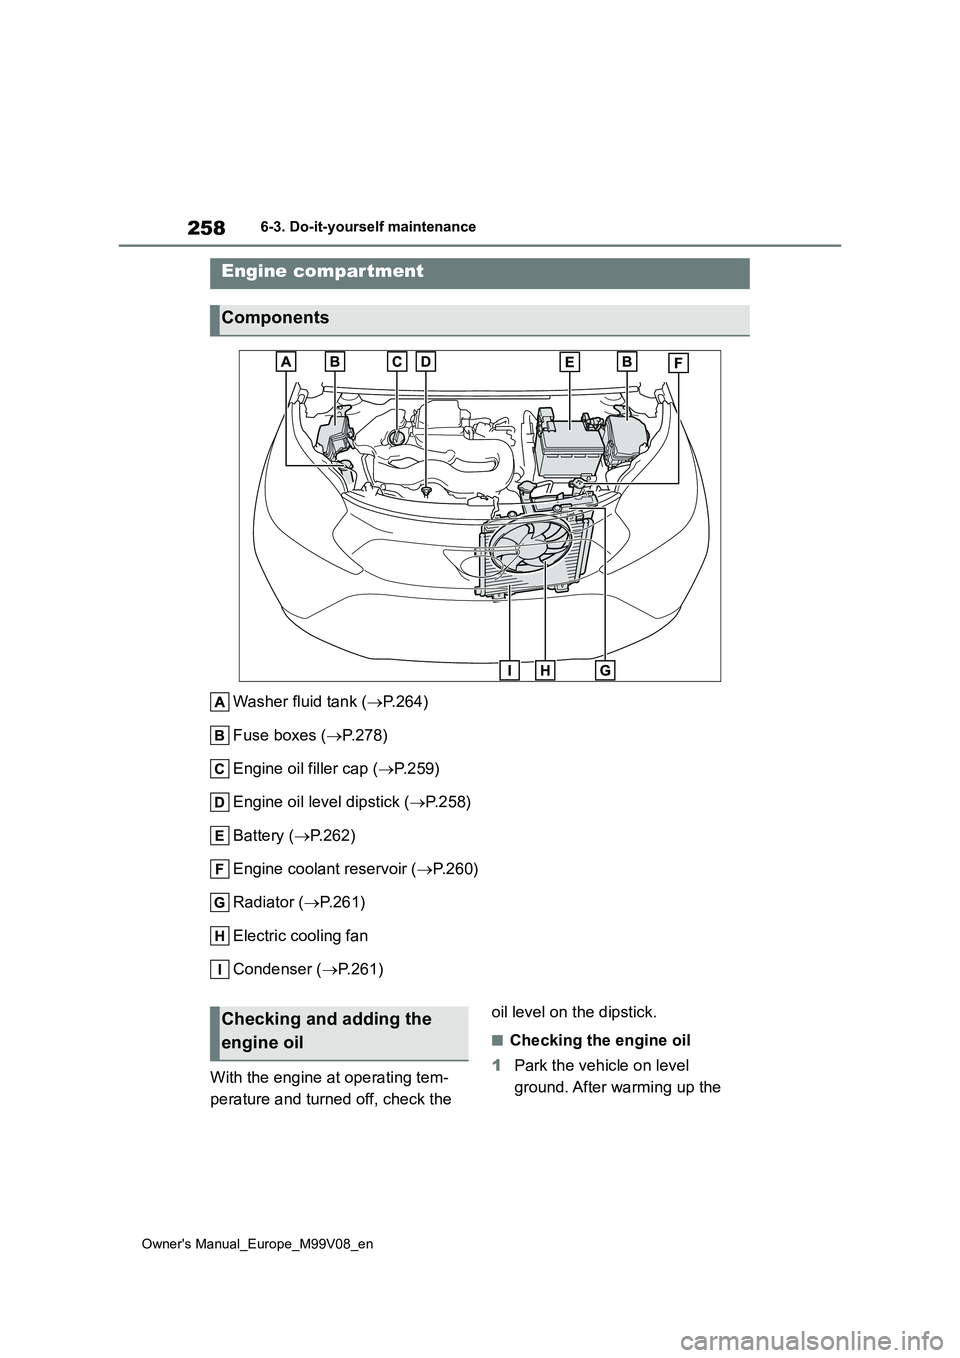 TOYOTA AYGO X 2022  Owners Manual (in English) 258
Owner's Manual_Europe_M99V08_en
6-3. Do-it-yourself maintenance
Washer fluid tank (P.264) 
Fuse boxes ( P.278) 
Engine oil filler cap ( P.259) 
Engine oil level dipstick ( P.258) 
